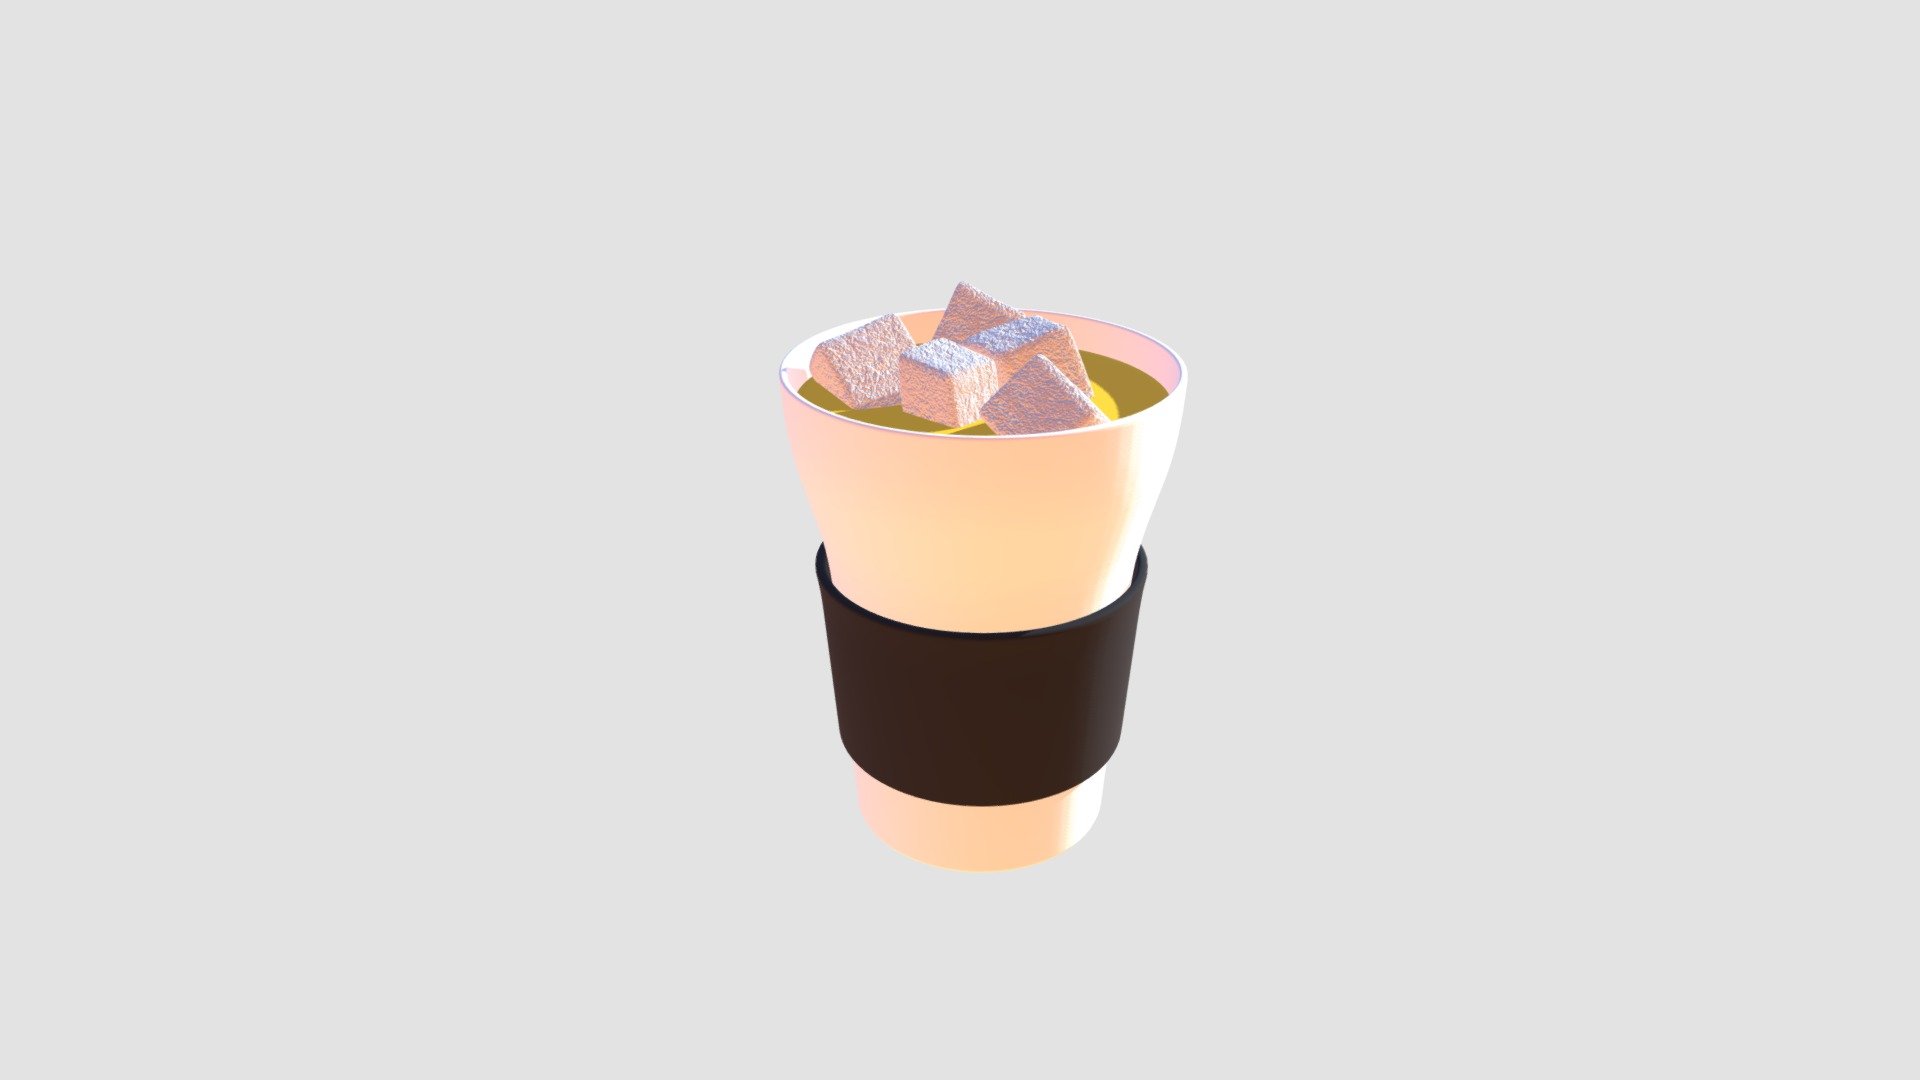 Highly detailed 3d model of drink cup with all textures, shaders and materials. It is ready to use, just put it into your scene 3d model